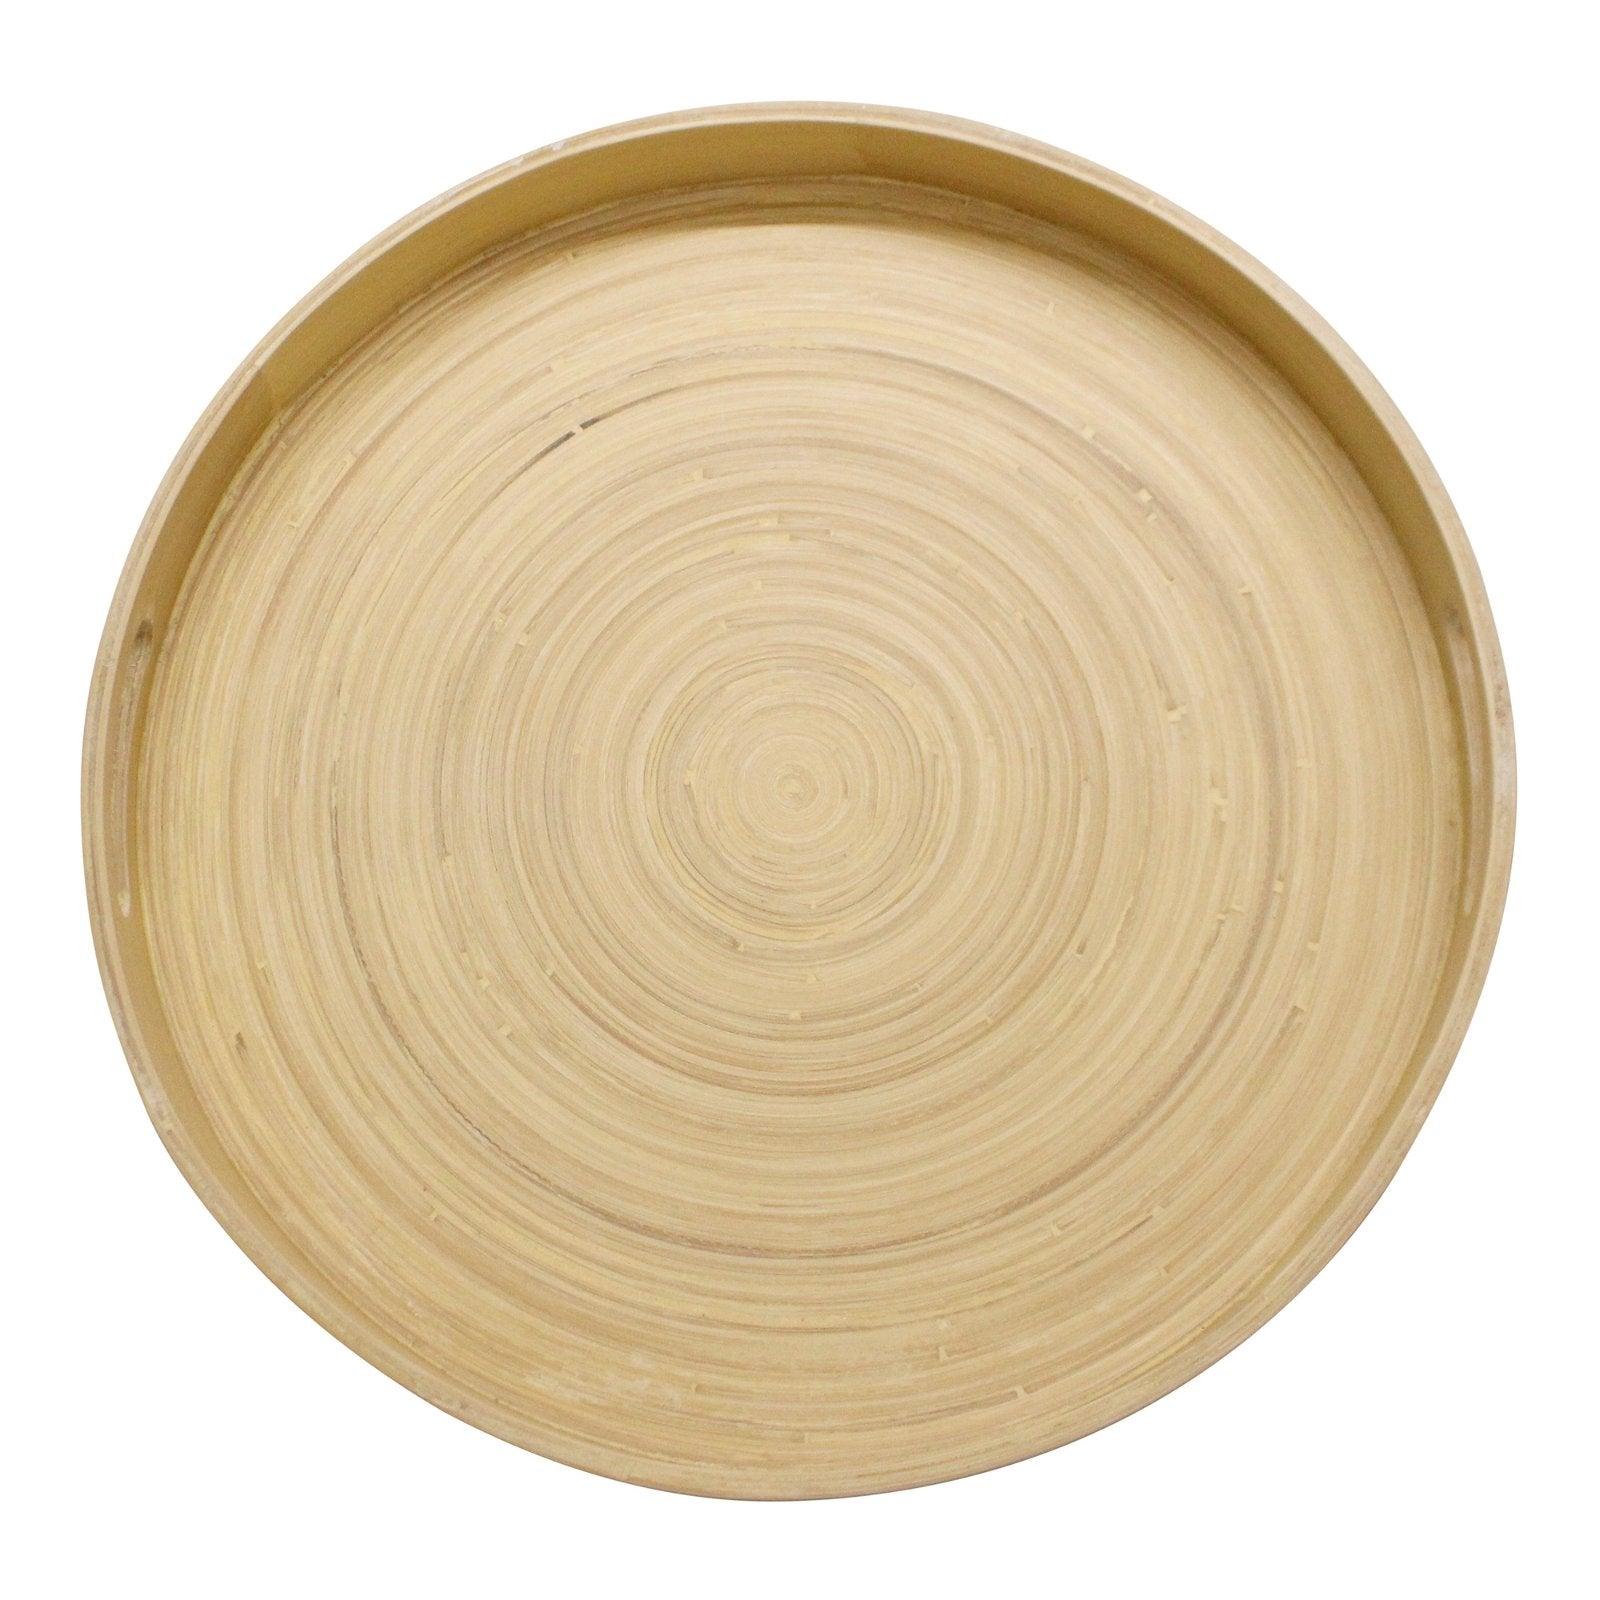 View Natural Interiors Bamboo Serving Tray With Handles information